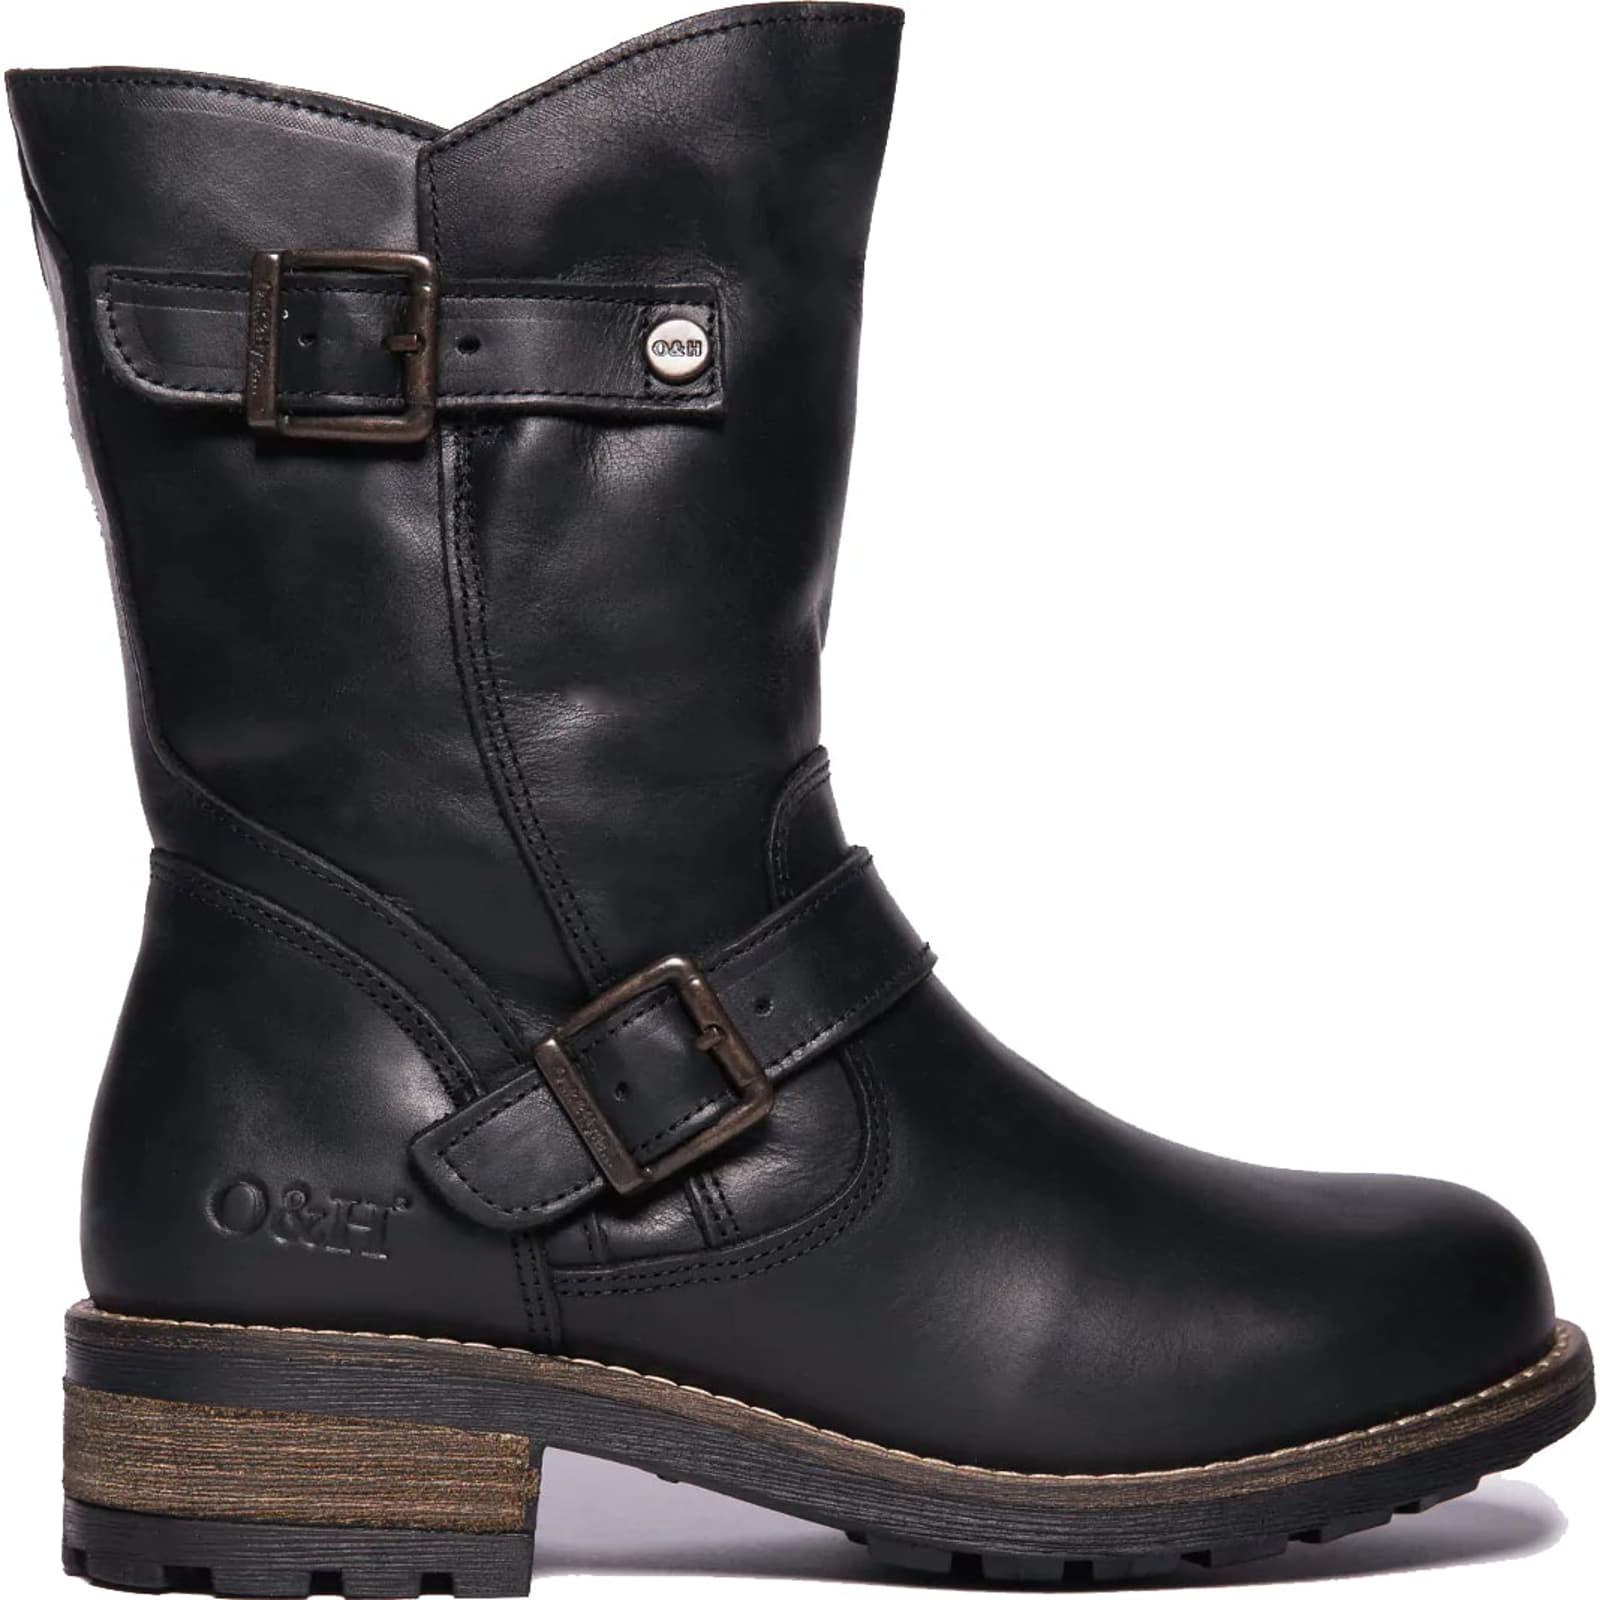 Womens Crest Demi Mid Calf Country Boots - Black